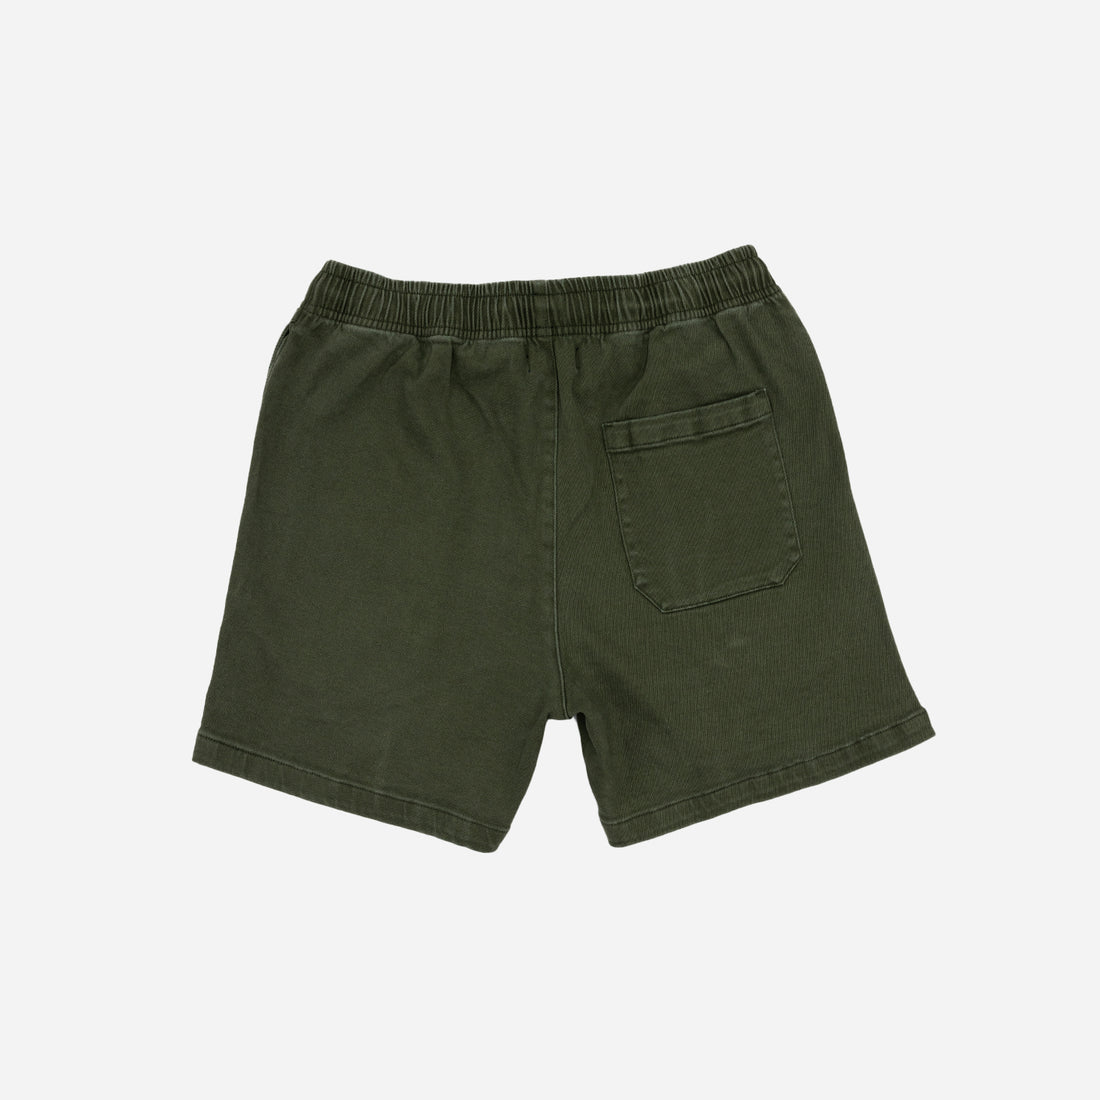 5" Woven Gym Shorts in Olive Green